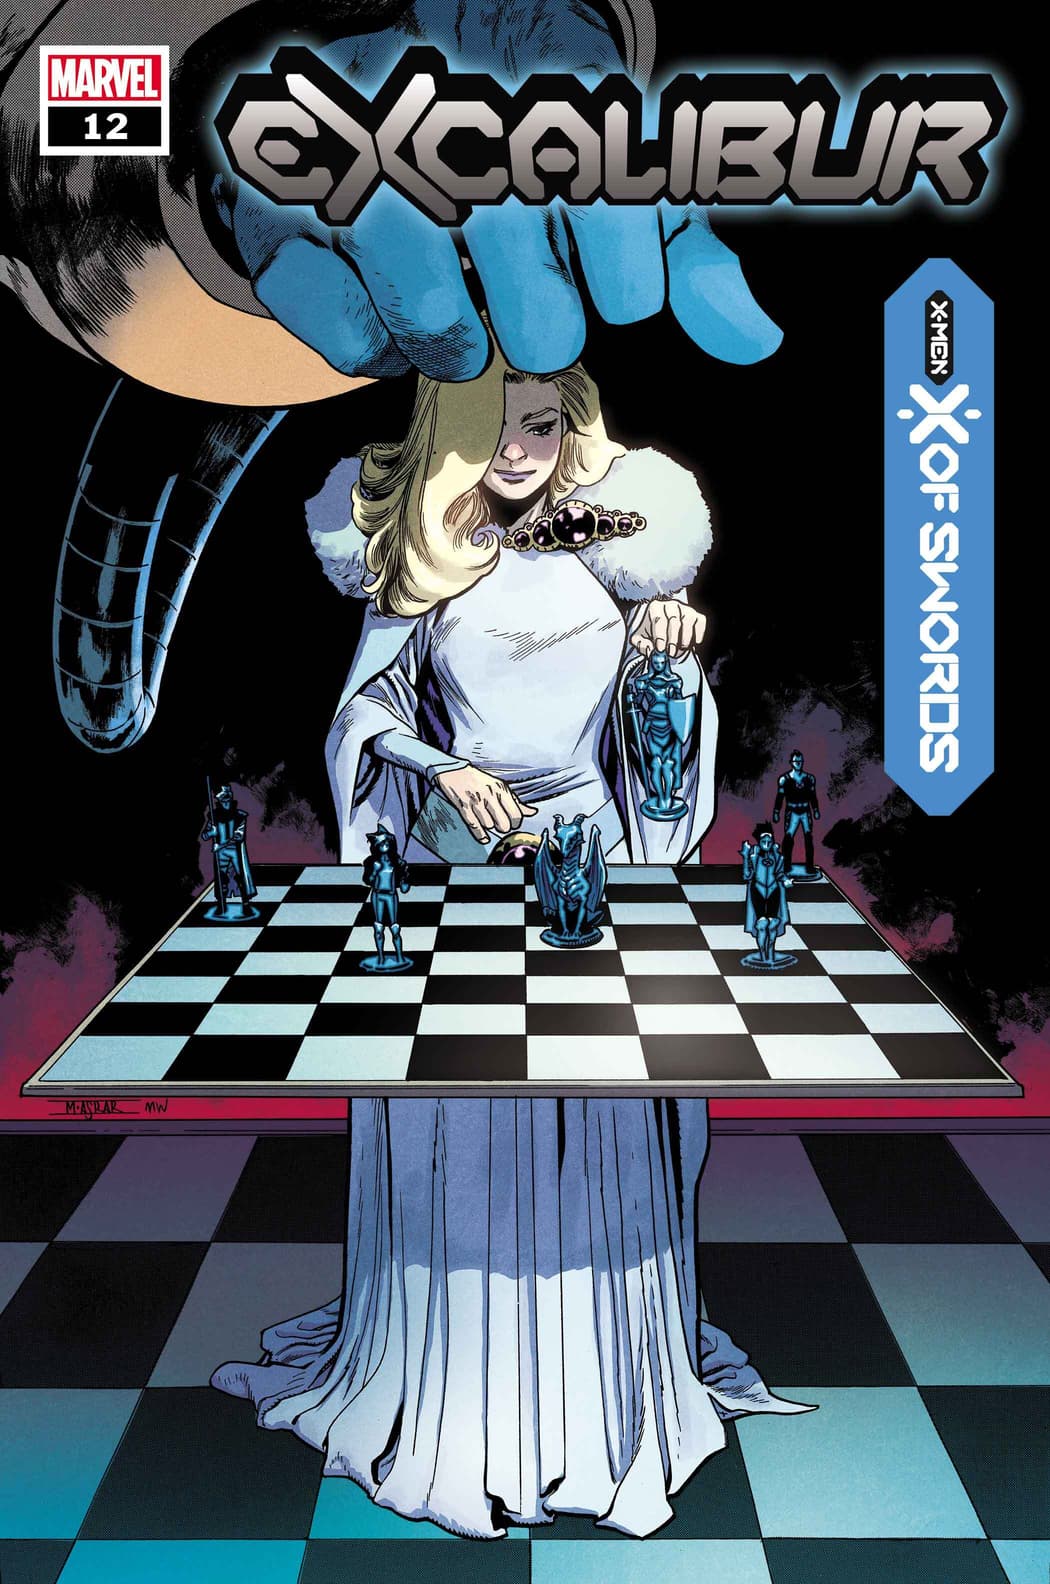 EXCALIBUR #12 WRITTEN BY TINI HOWARD, ART BY MARCUS TO, COVER BY MAHMUD ASRAR